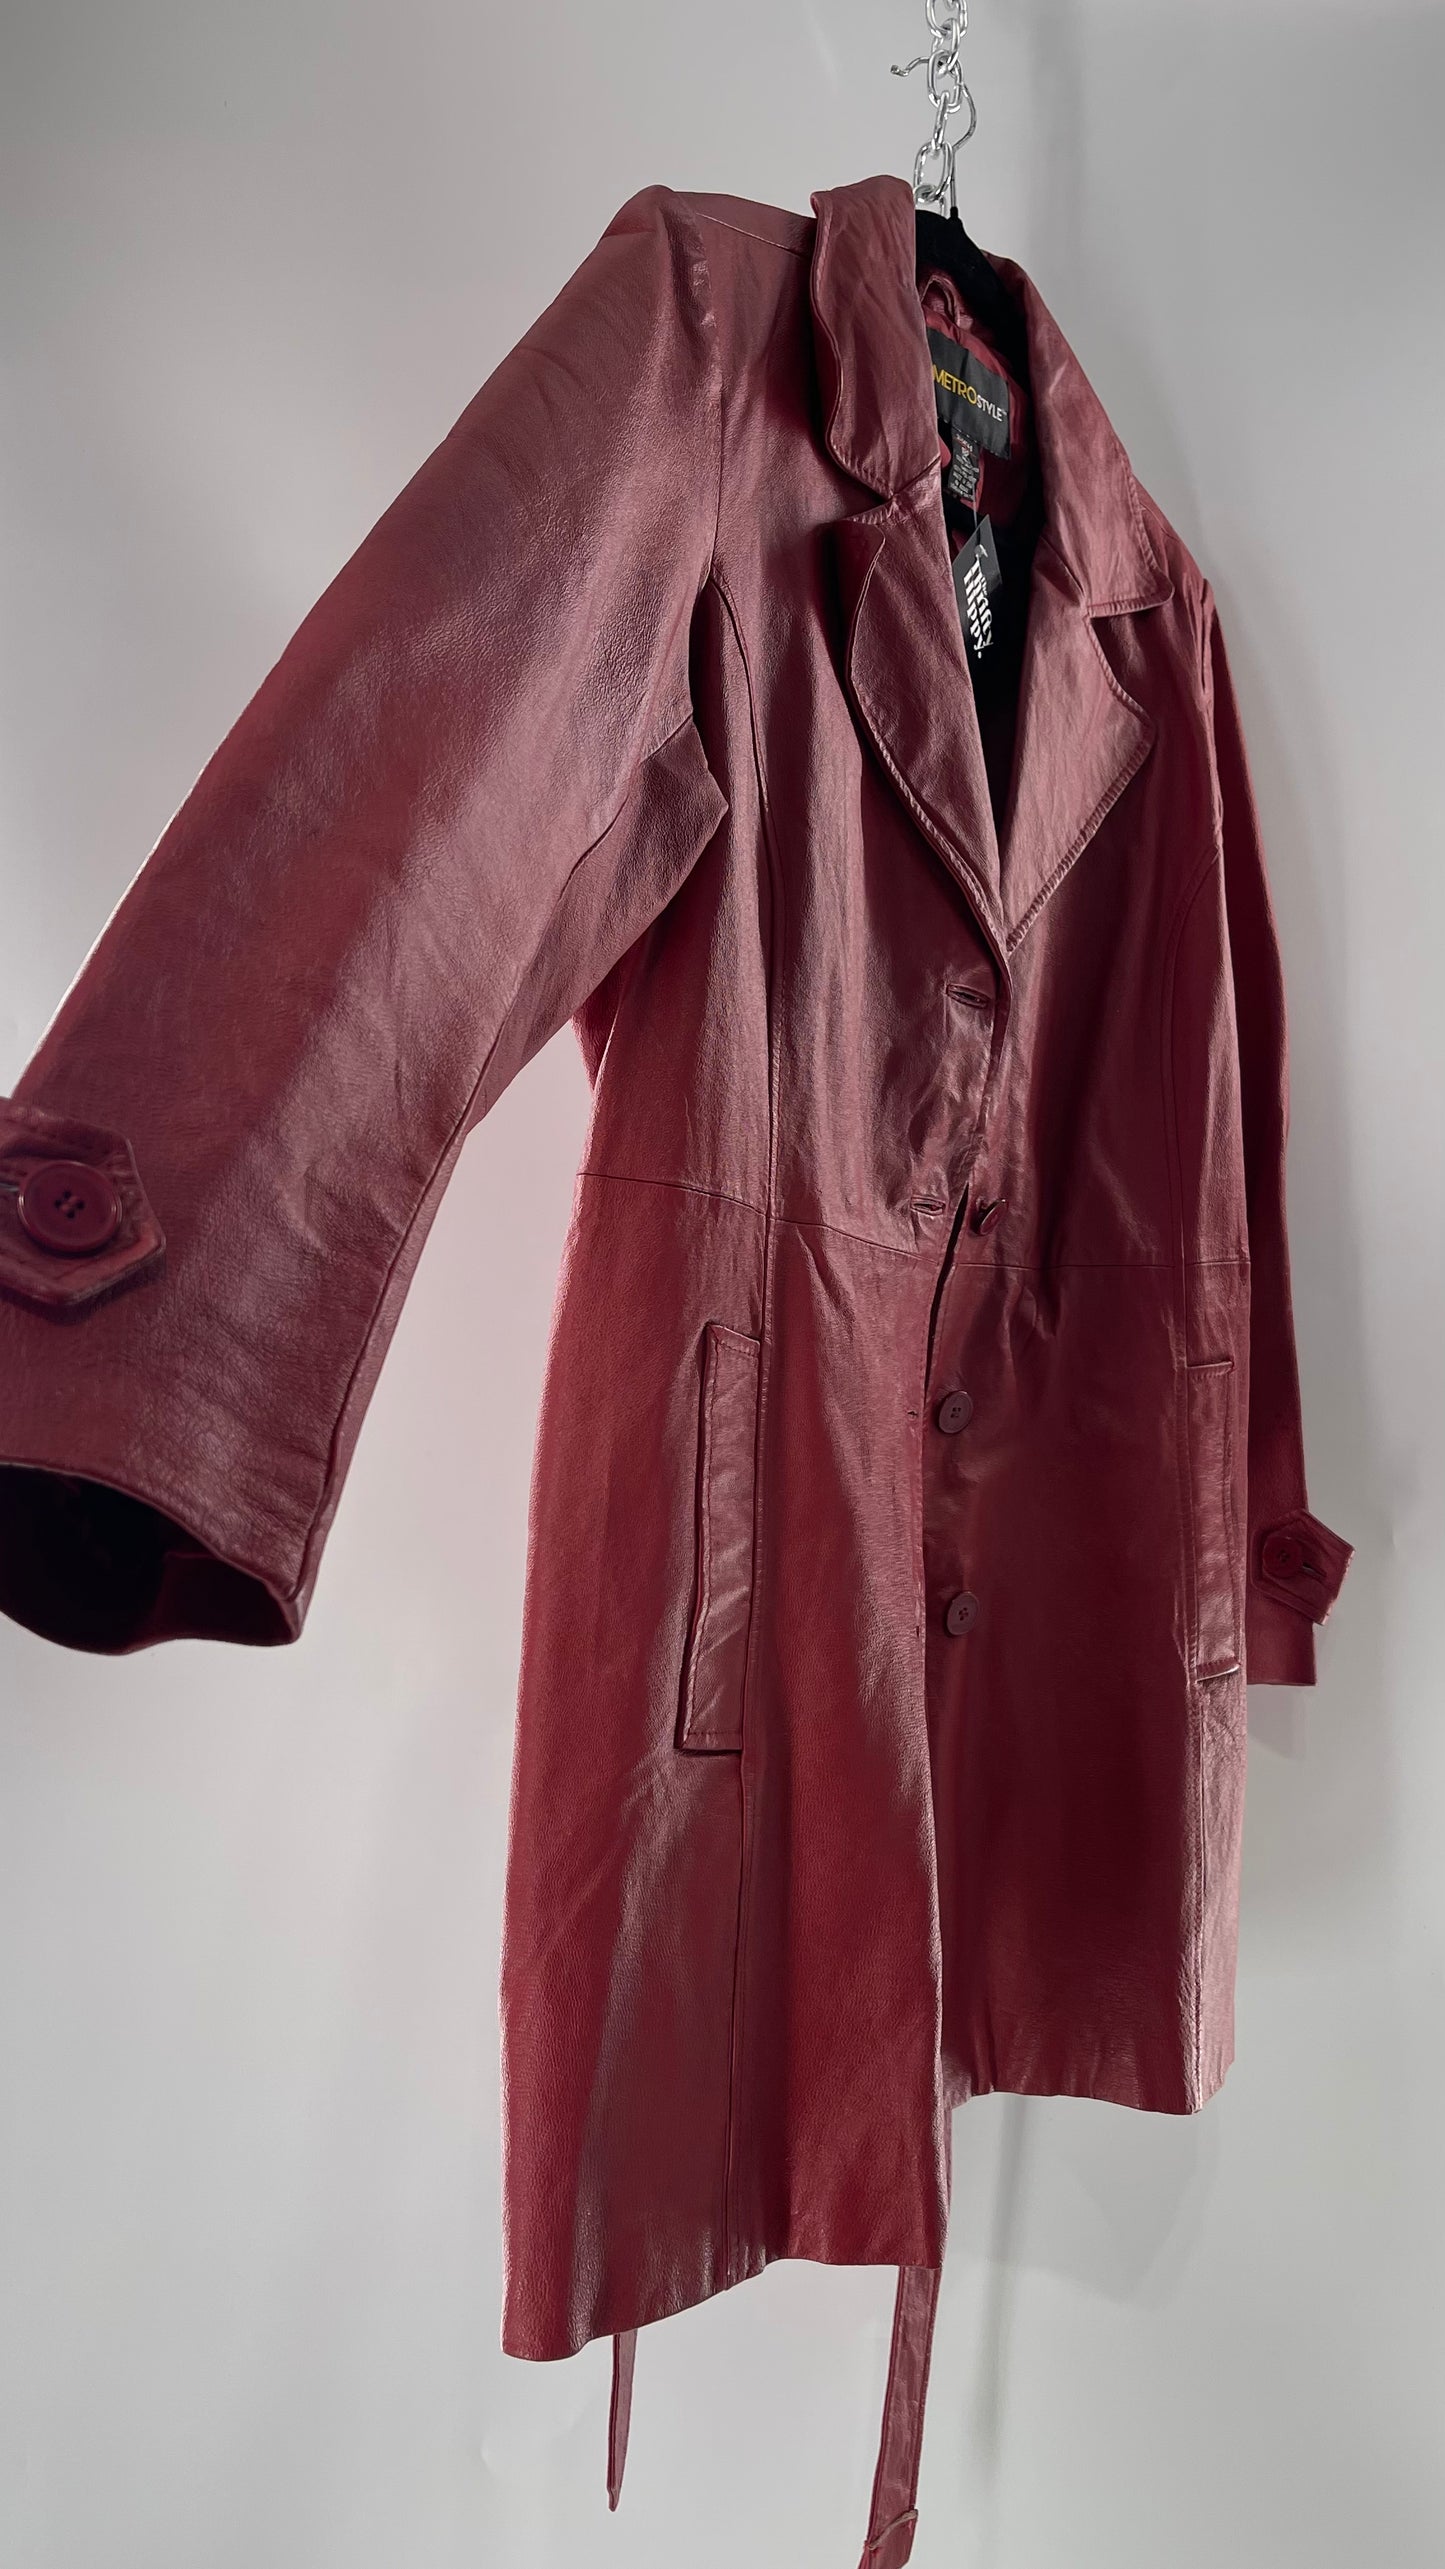 Vintage MetroStyle Red Leather Trench (C)(L/XL)